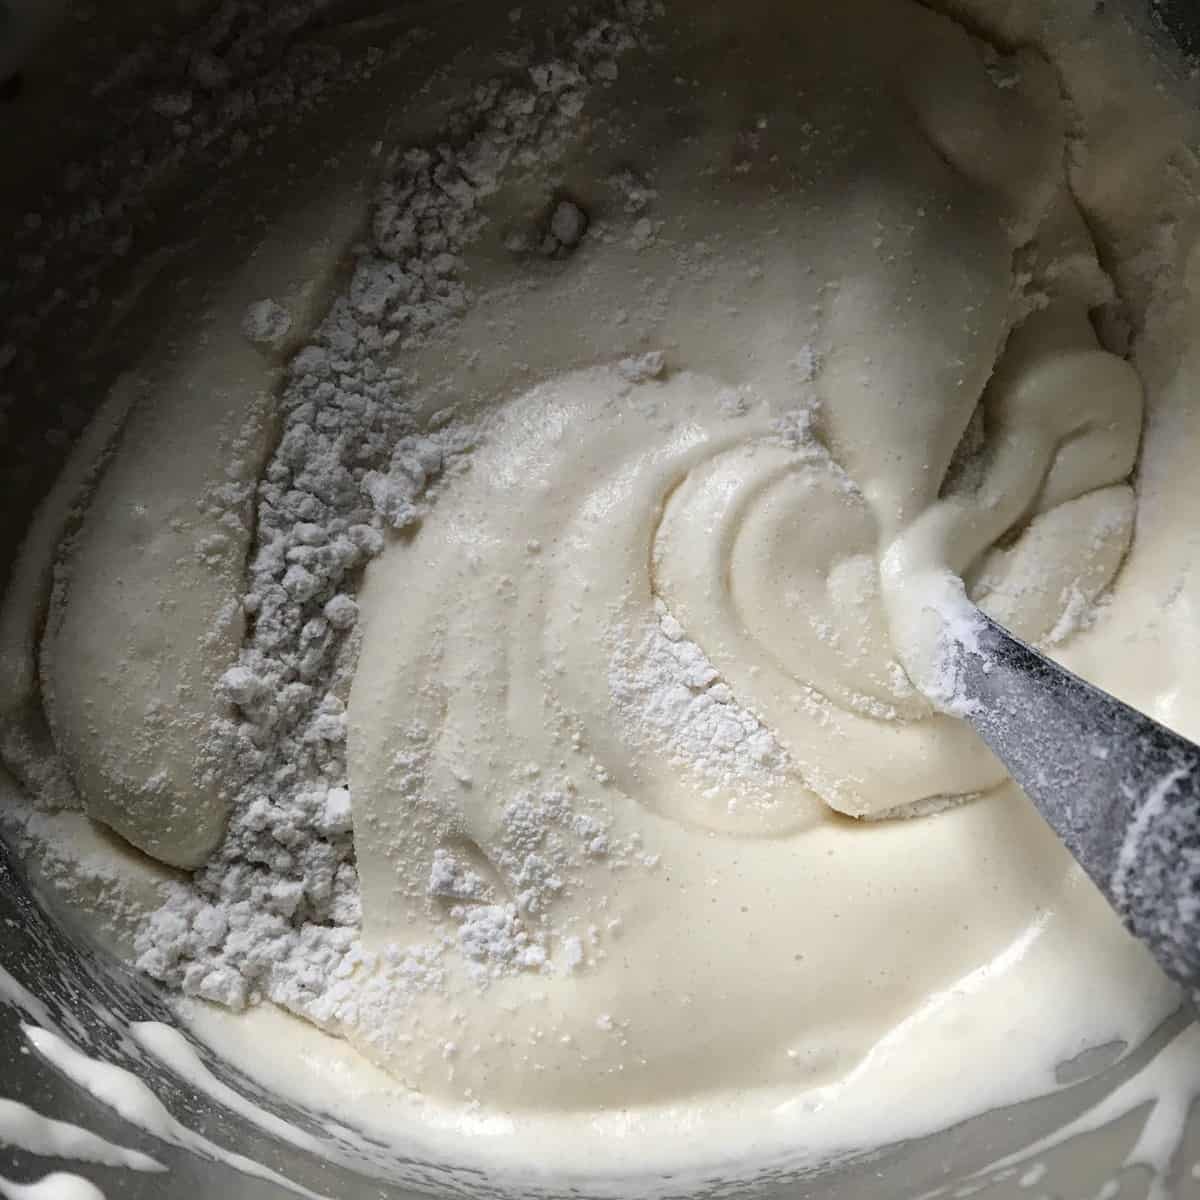 Flour being incorporated in the egg mixture.